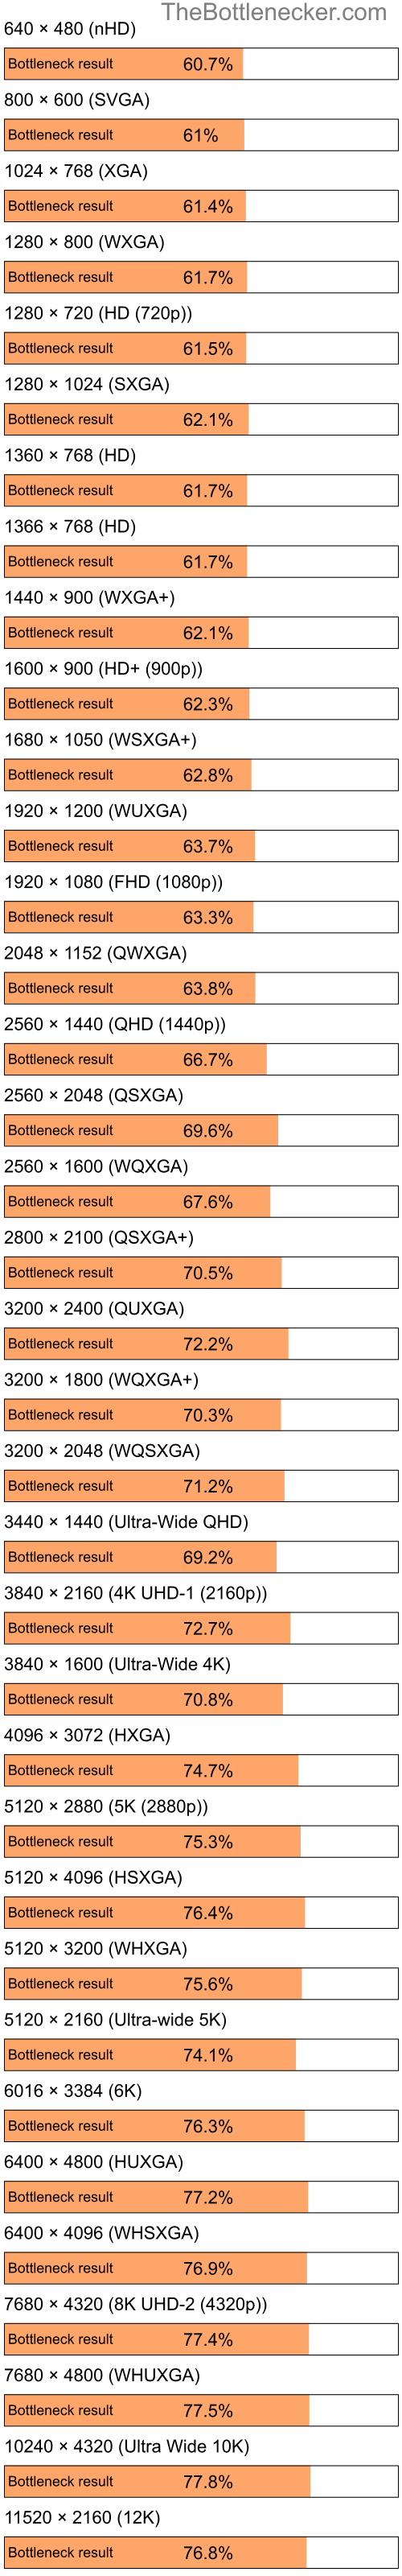 Bottleneck results by resolution for Intel Celeron M and NVIDIA Quadro FX 3400 in General Tasks